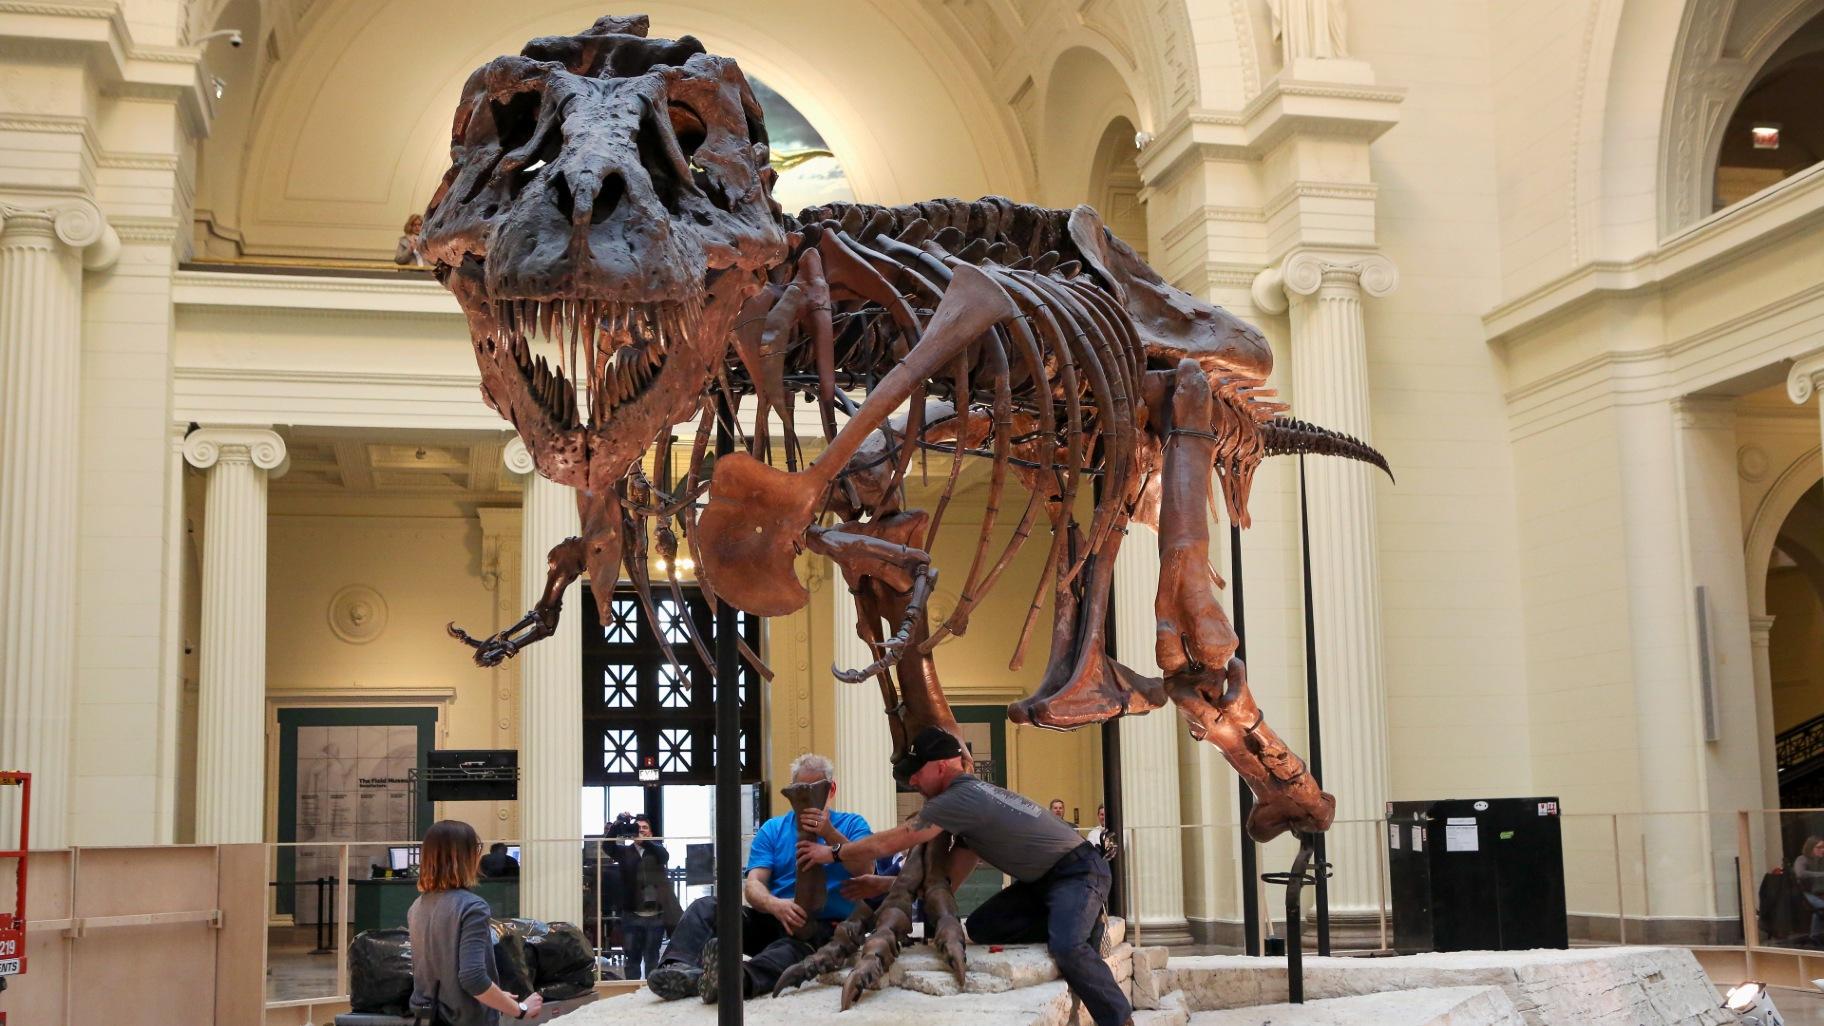 FILE - In this Feb. 5, 2018, photo, Garth Dallman, center, and Bill Kouchie, right, both from the dinosaur restoration firm Research Casting International, Ltd., begin the of dismantling Sue, the Tyrannosaurus rex, on display at Chicago's Field Museum. (Teresa Crawford / AP Photo, file)